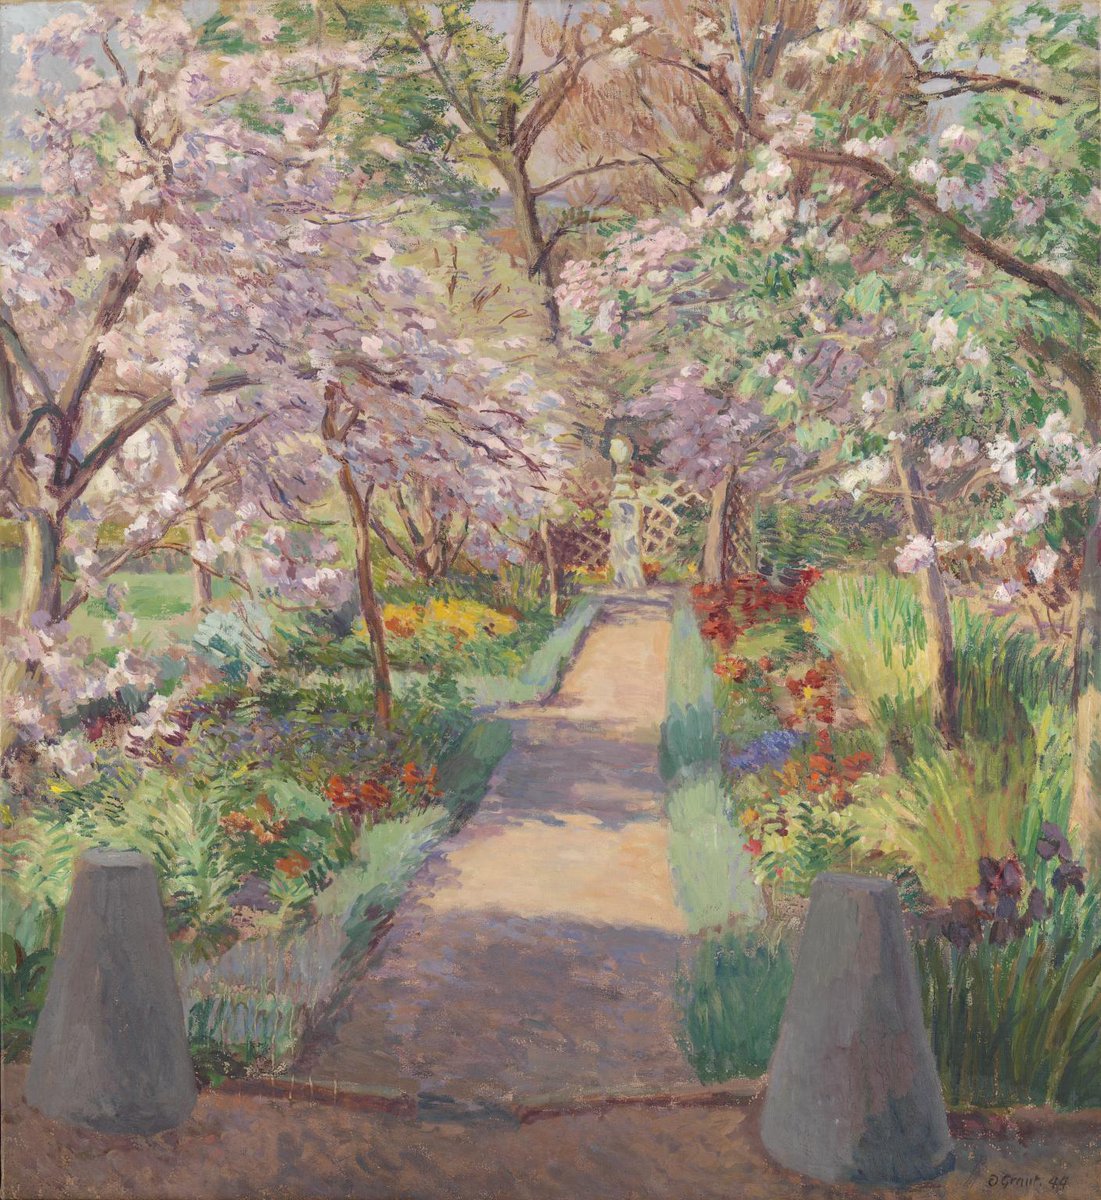 Garden Path in Spring by Duncan Grant 1944 (Tate, London). Charleston, Firle, Sussex.